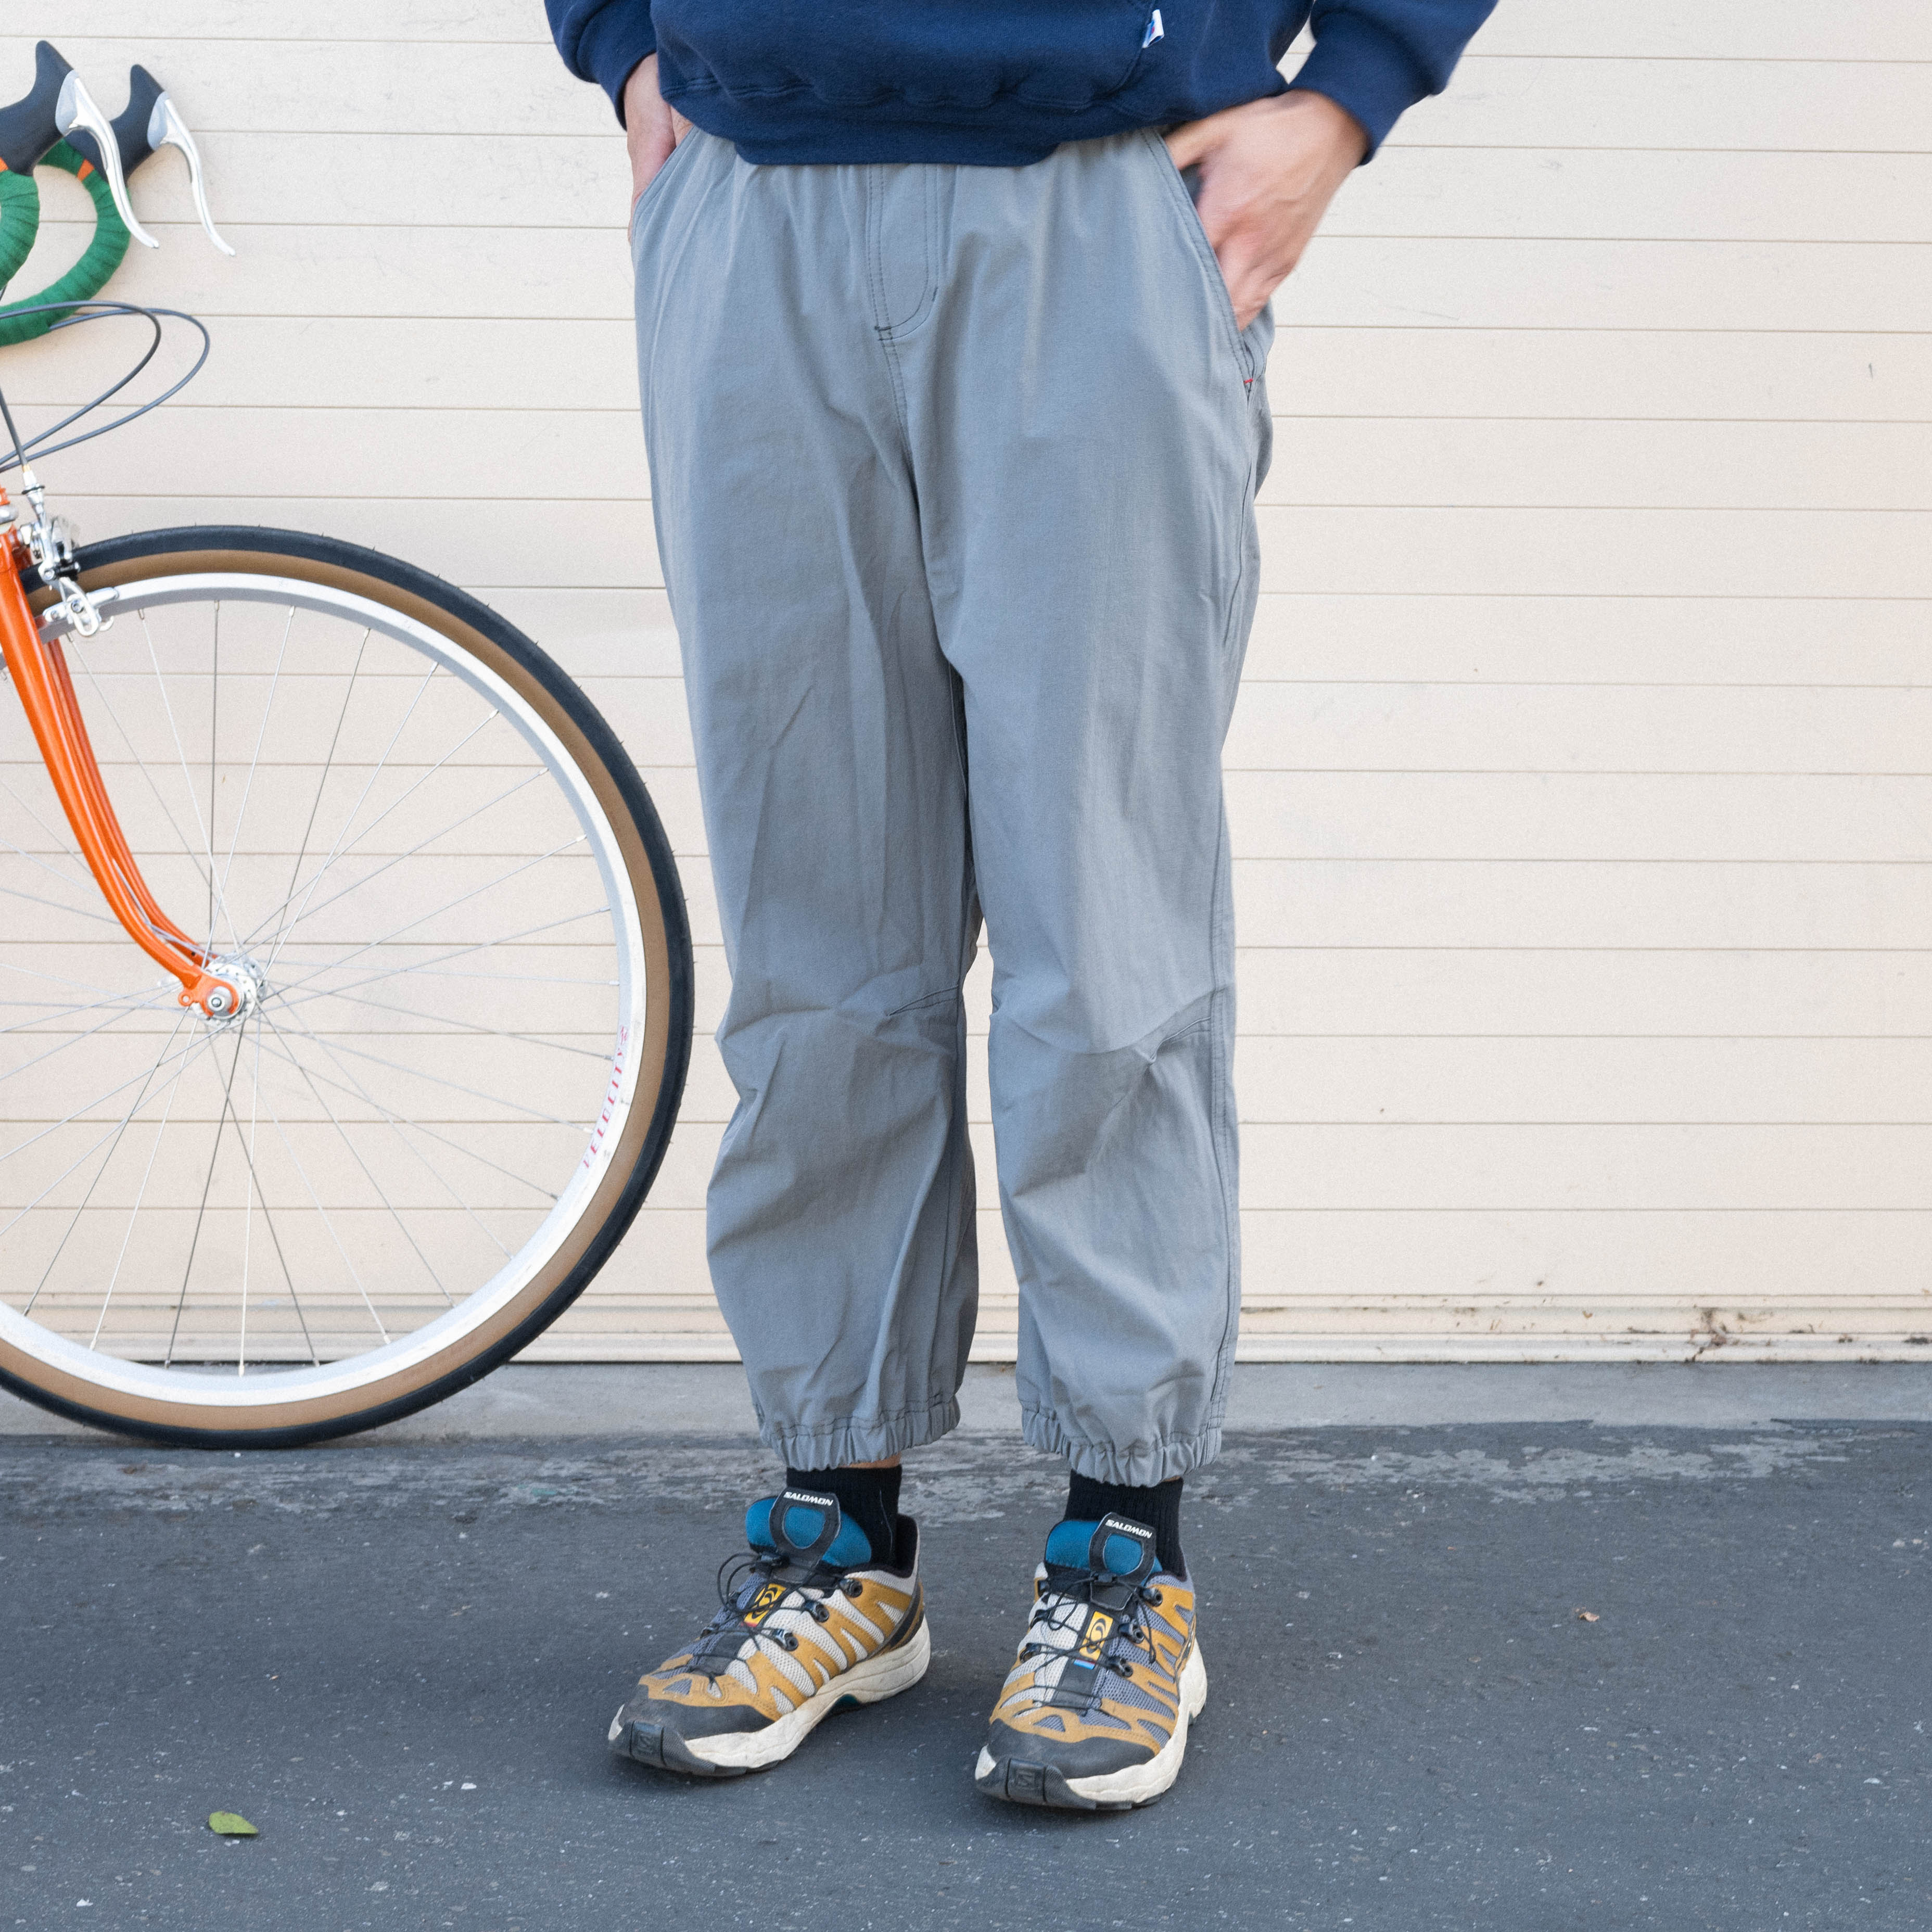 MUSA Clothing – Rivendell Bicycle Works